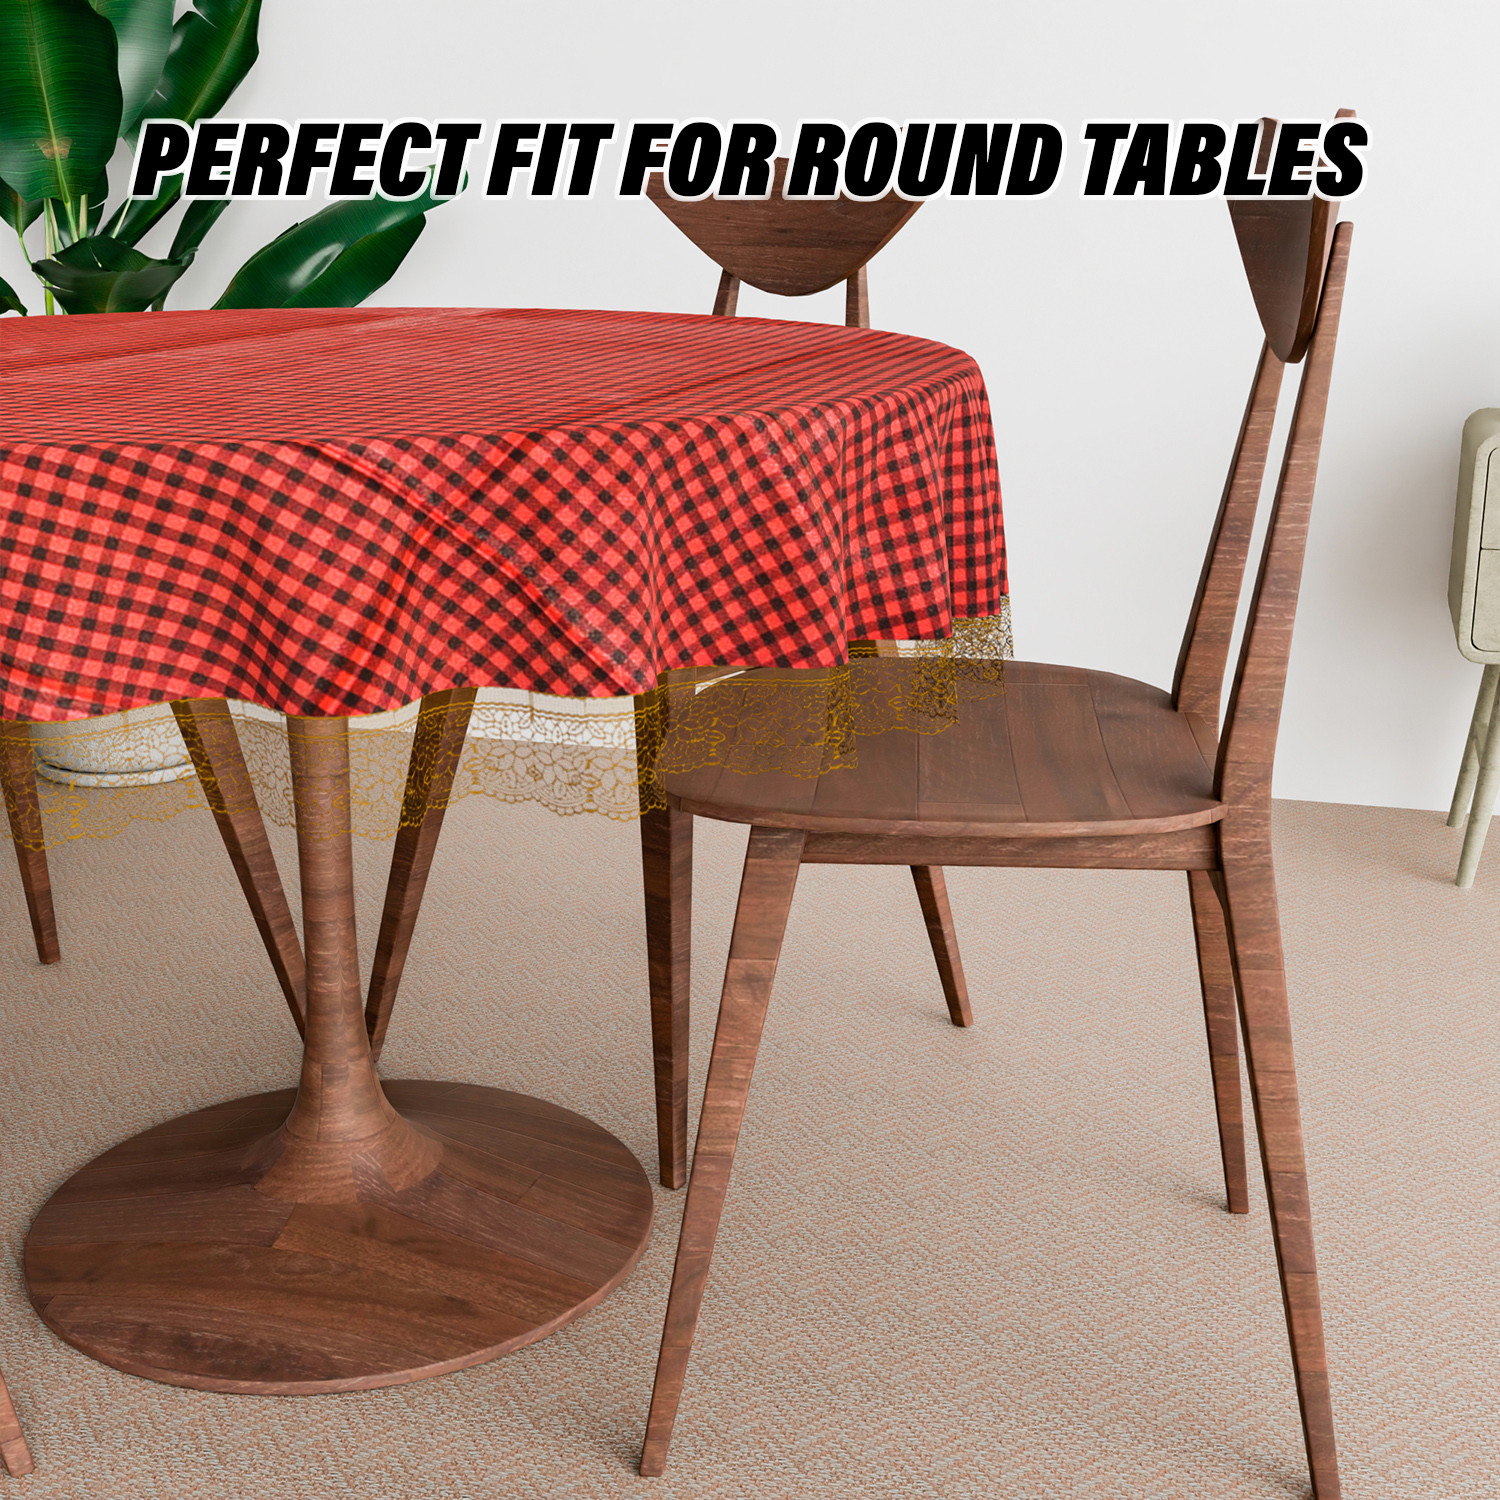 Kuber Industries Round Table Cover | Table Cloth for Round Tables | 4 Seater Round Table Cloth | Barik Check Kitchen Dining Tablecloth | Tabletop Cover | 60 Inch | Maroon